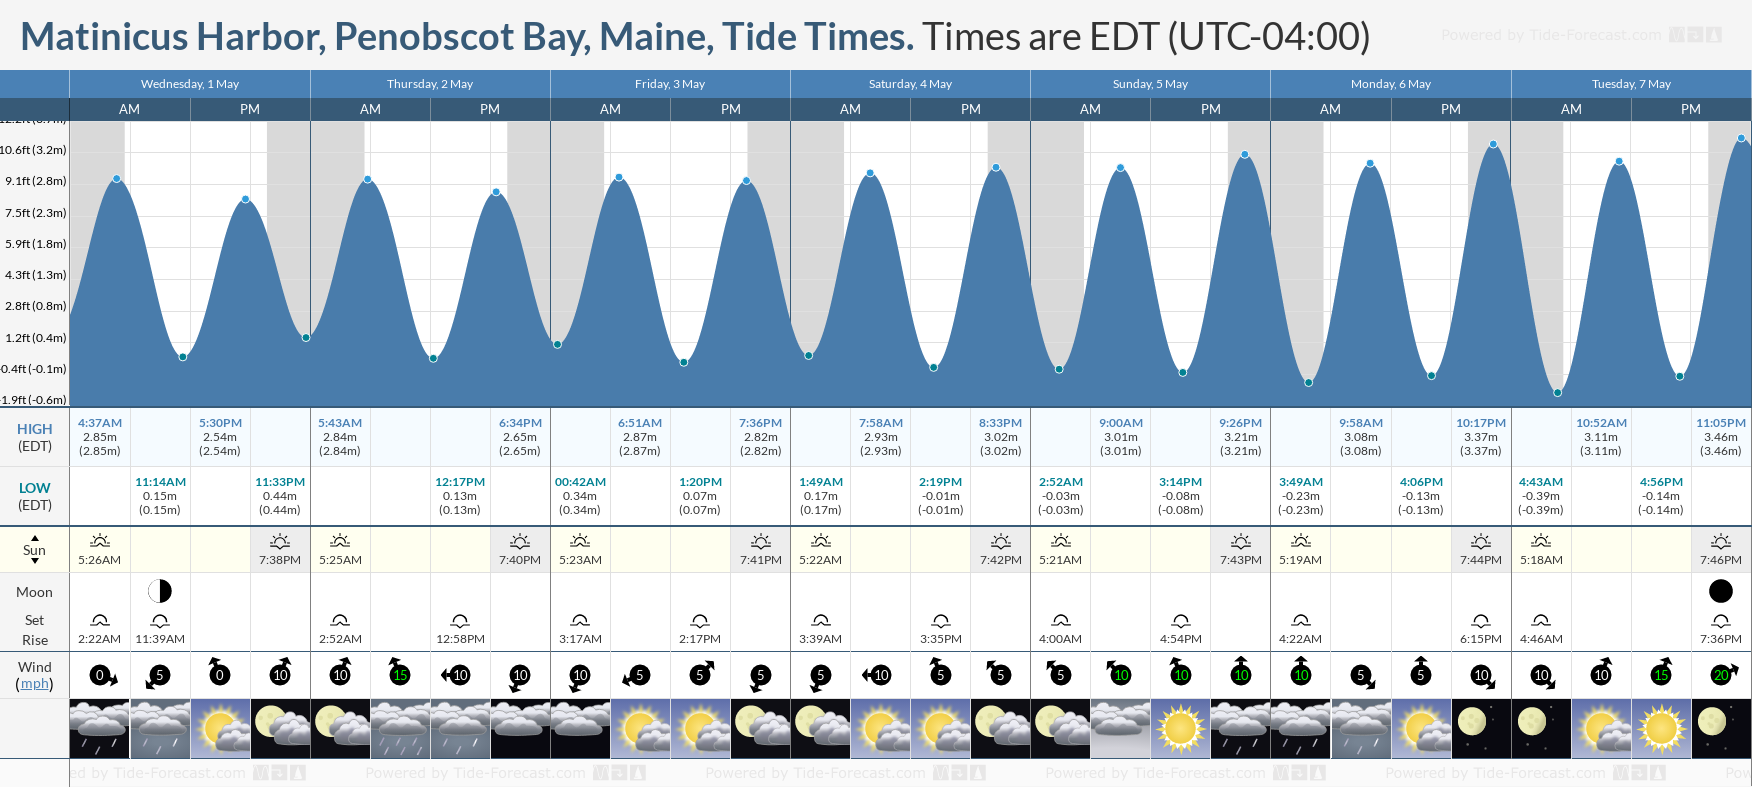 Matinicus Harbor, Penobscot Bay, Maine Tide Chart including high and low tide tide times for the next 7 days